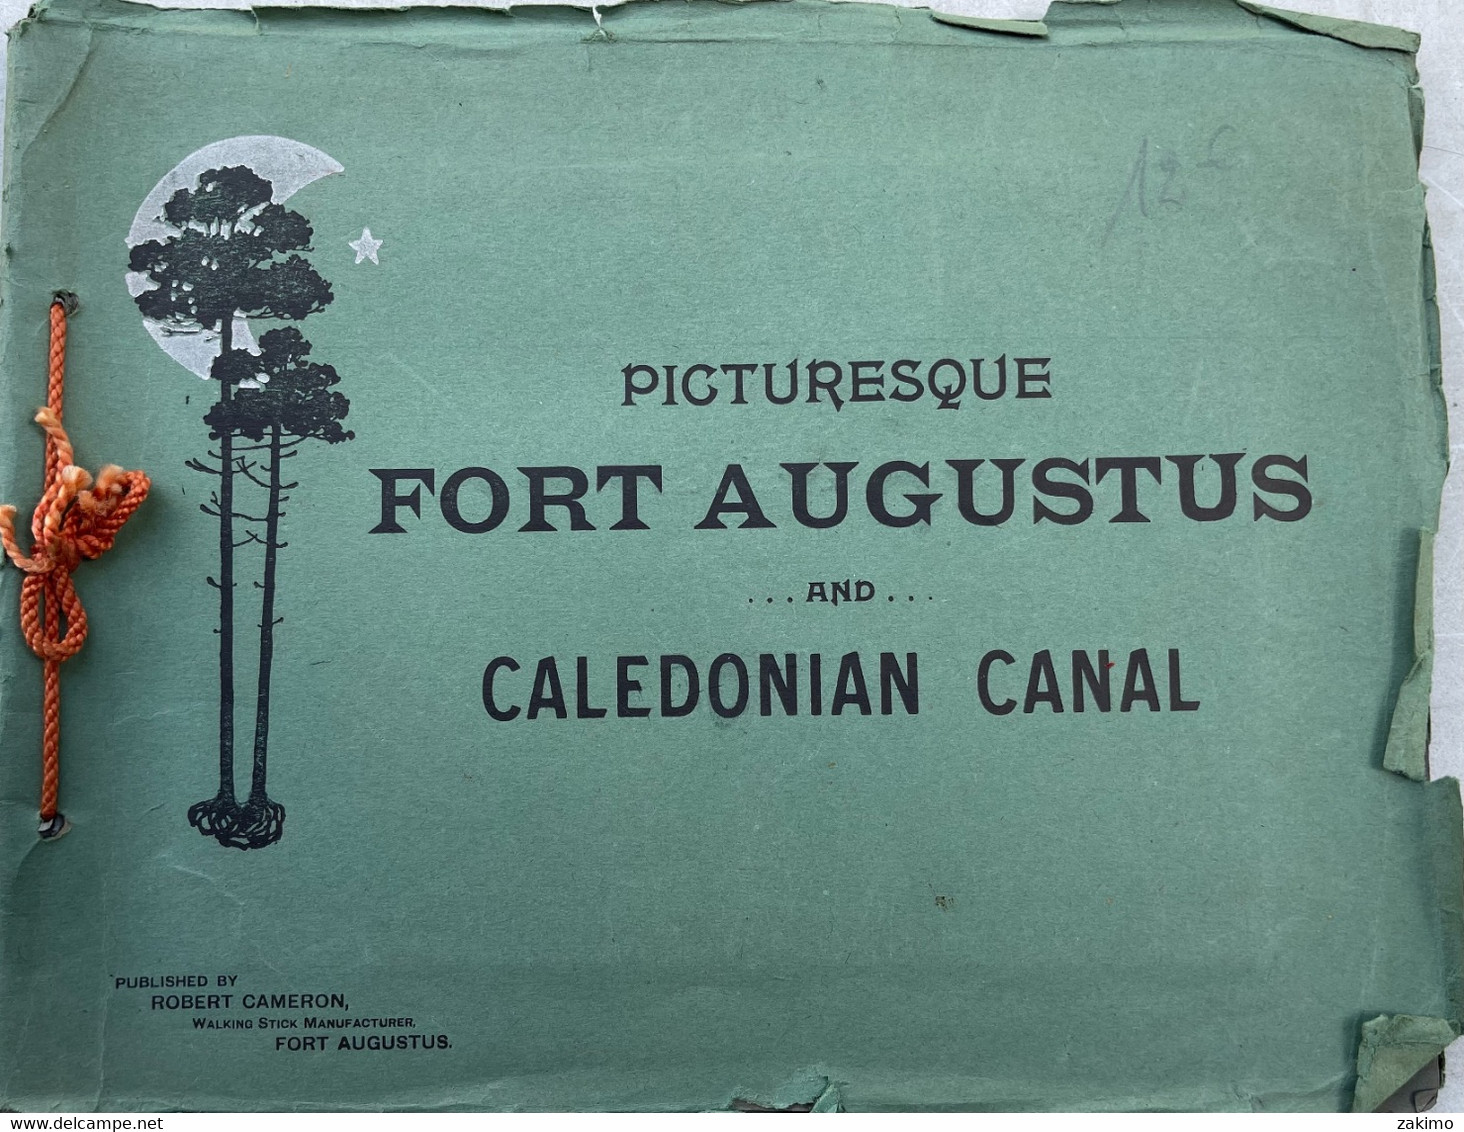 PICTURESQUE FORT AUGUSTUS AND CALEDONIAN CANAL - Cultural